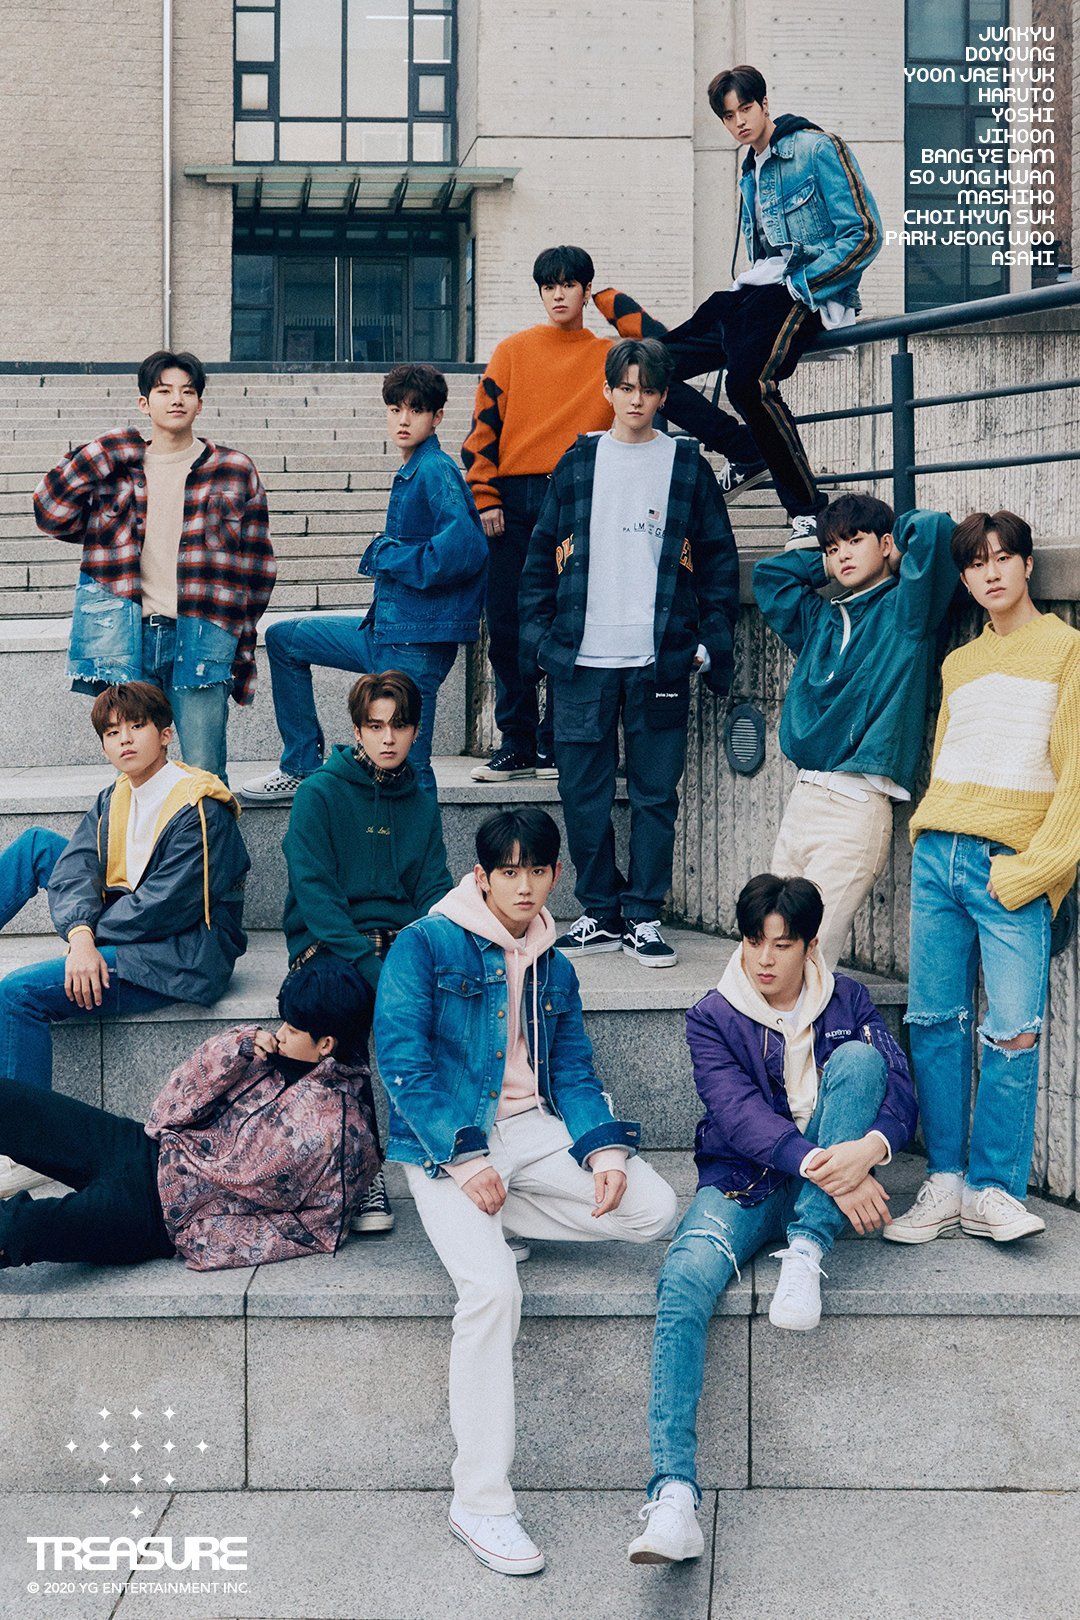 Update: TREASURE Shares New Group Photo Ahead Of Debut